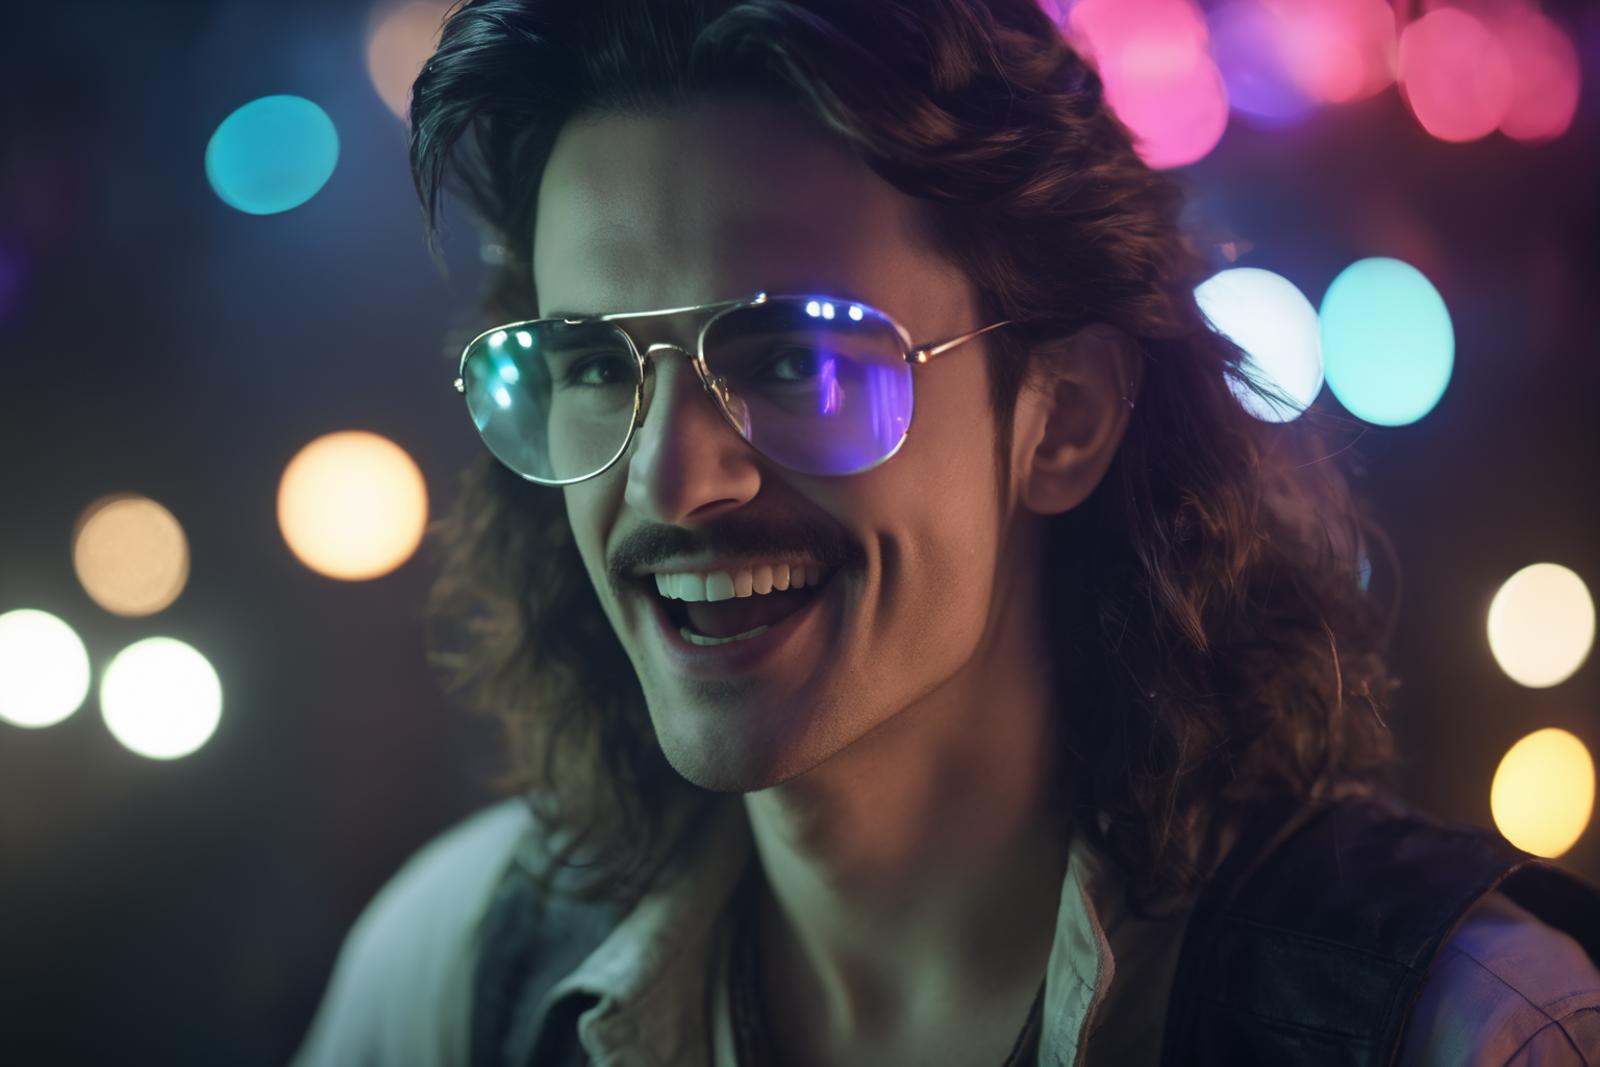 A smiling man with a mustache wearing sunglasses and a vest.